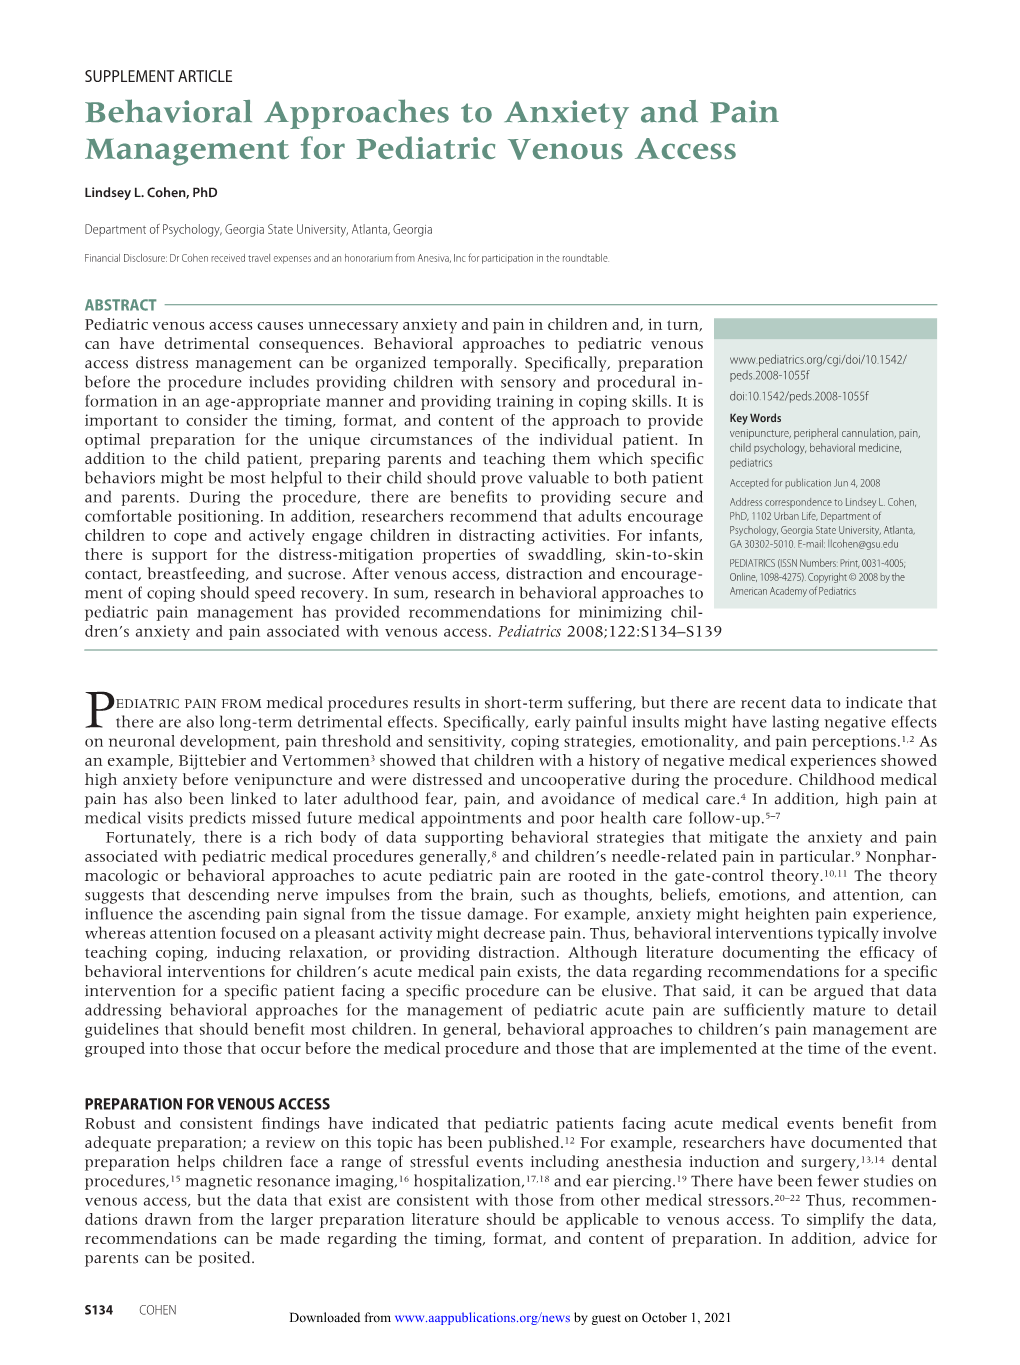 Behavioral Approaches to Anxiety and Pain Management for Pediatric Venous Access